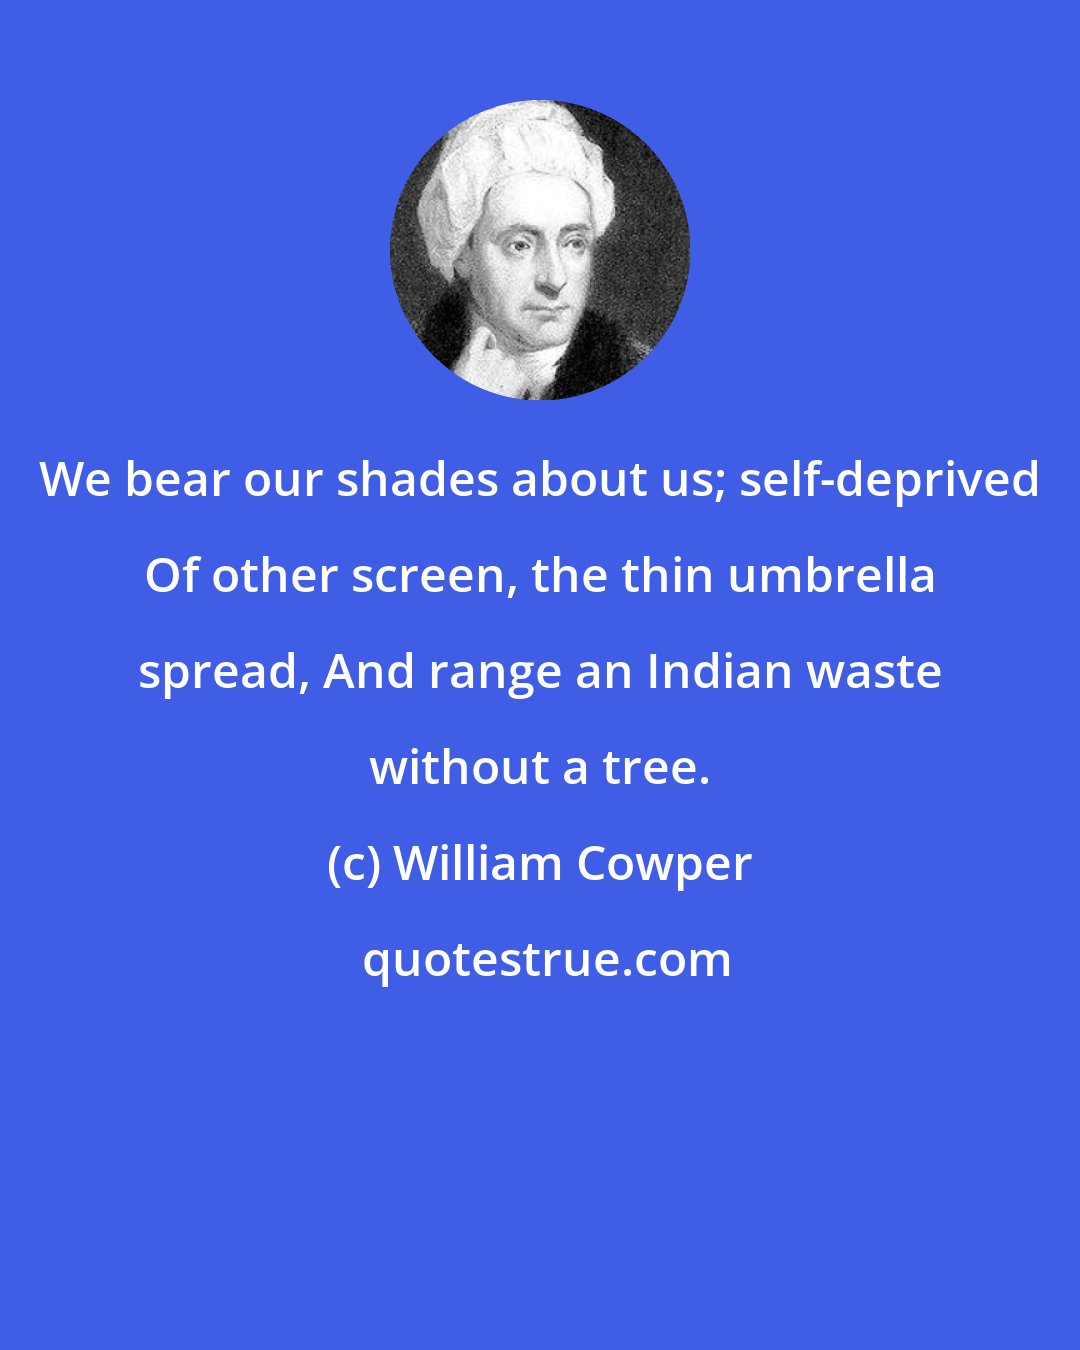 William Cowper: We bear our shades about us; self-deprived Of other screen, the thin umbrella spread, And range an Indian waste without a tree.